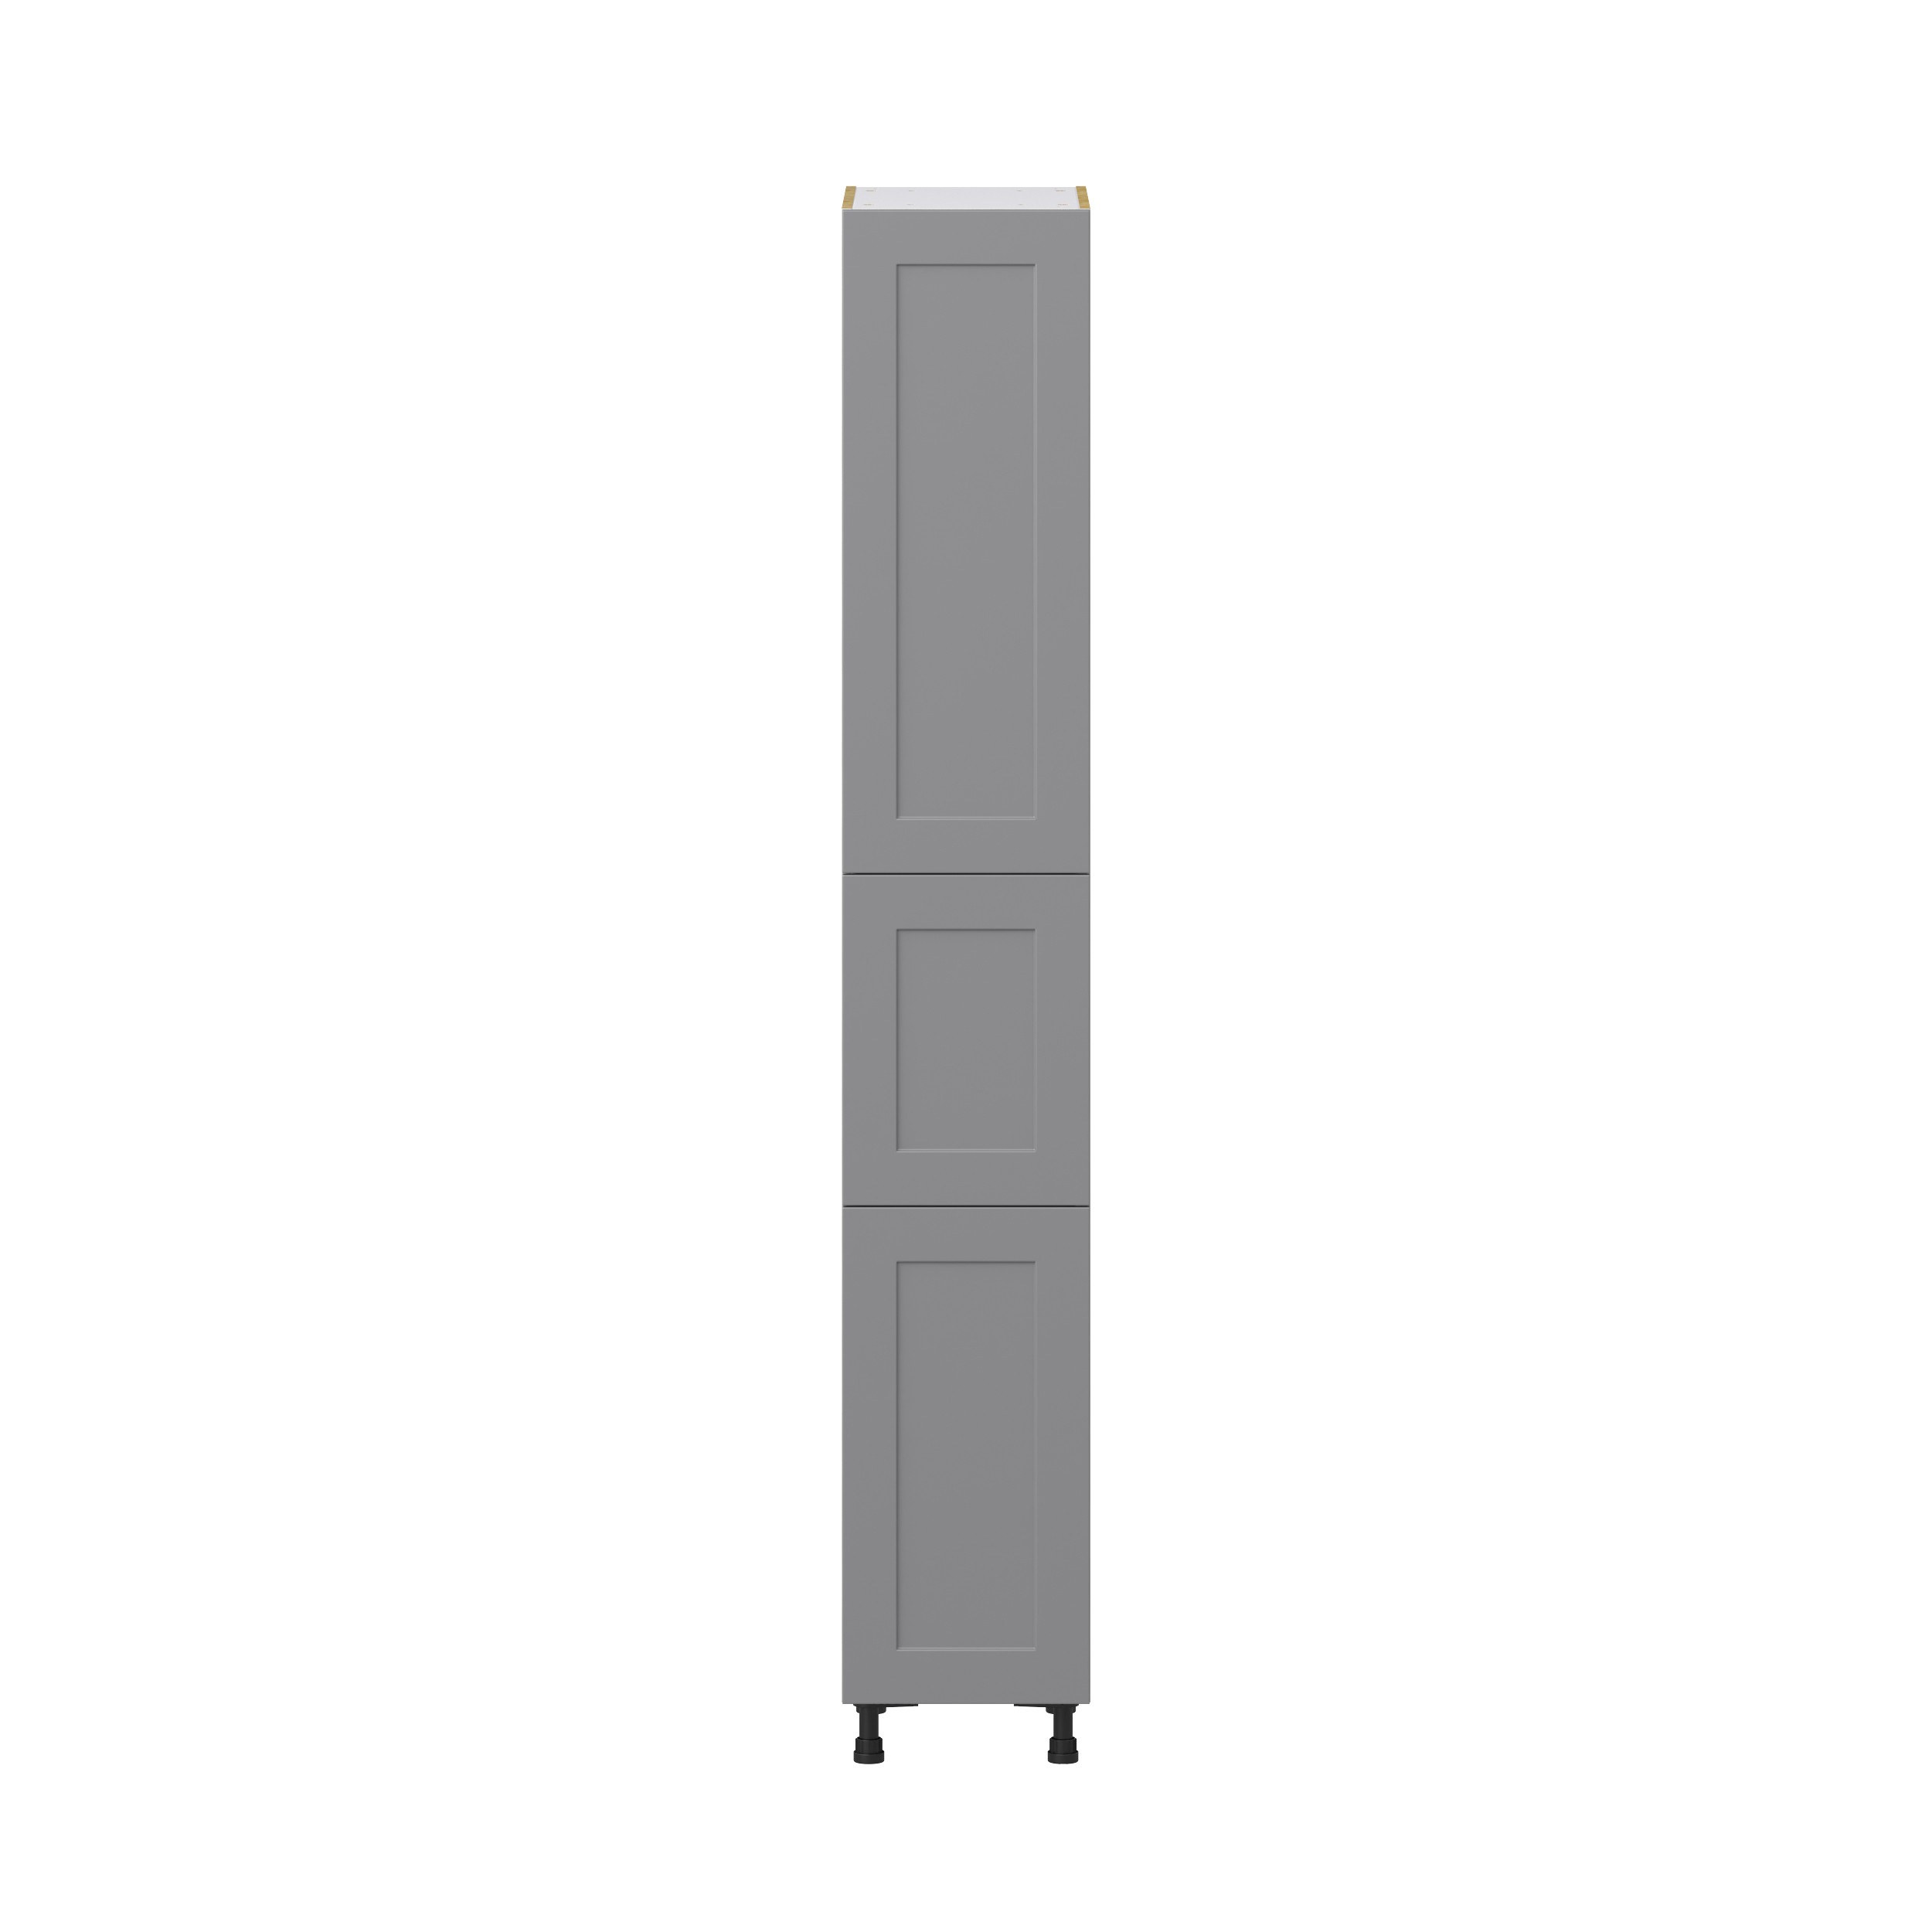 Willow Painted Slate Gray Shaker Assembled Pantry Cabinet with 5 Shelves (15 in. W x 94.5 in. H x 24 in. D)